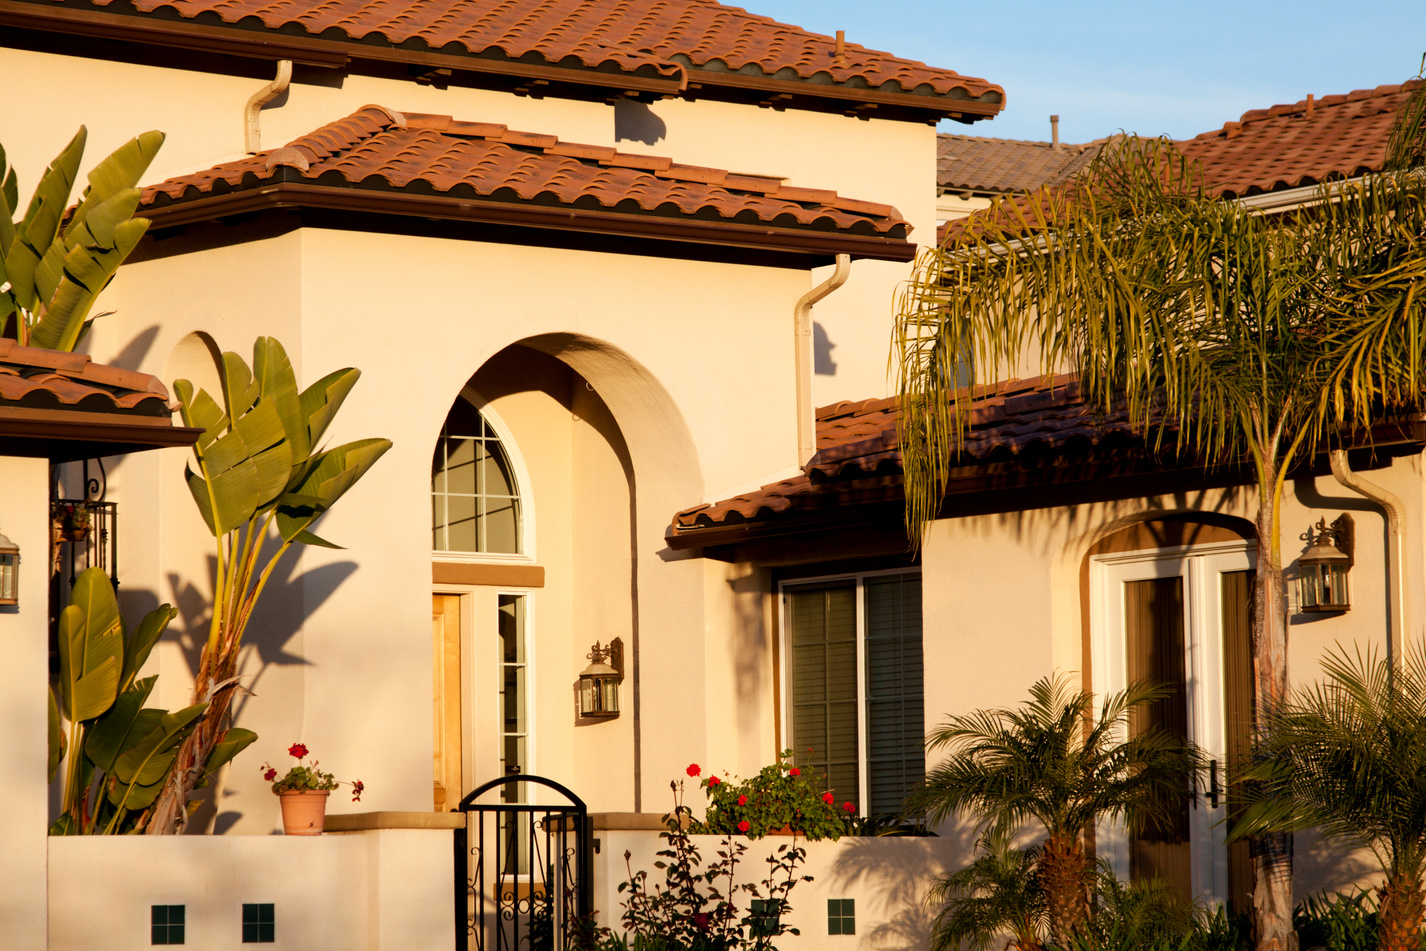 Stucco Home Exterior with Arched Entry